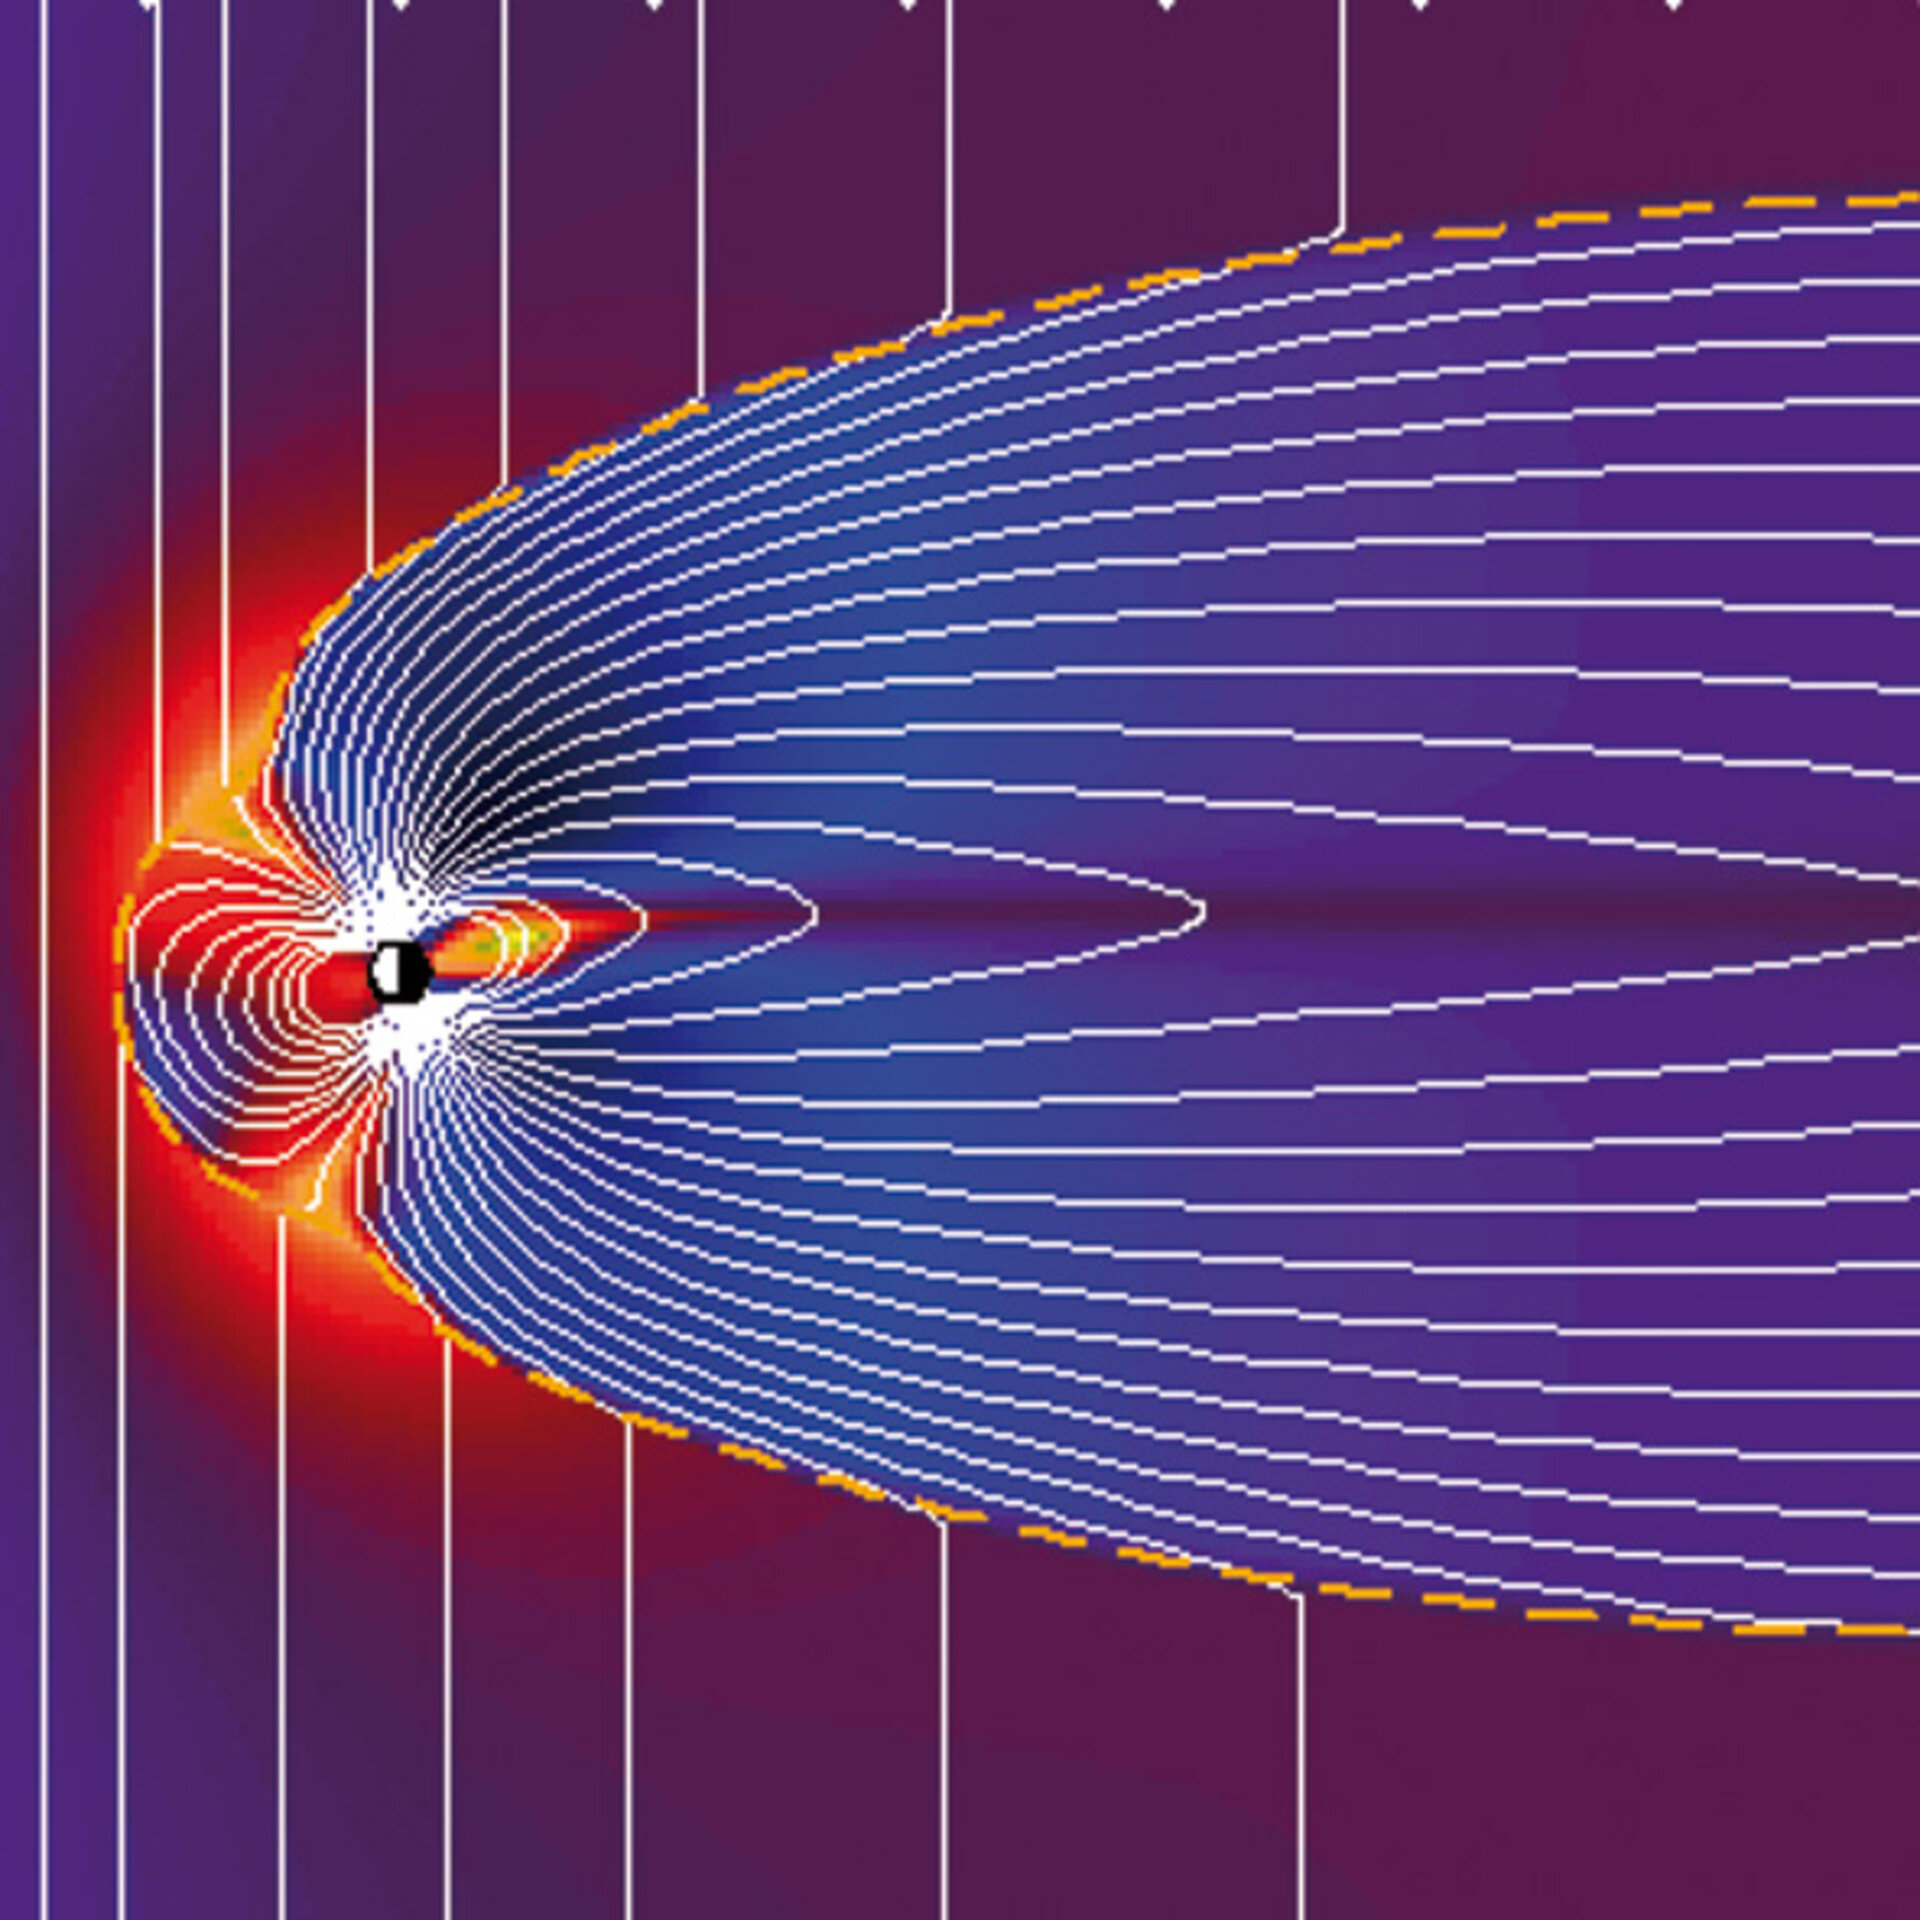 Illustration of the Earth's magnetosphere